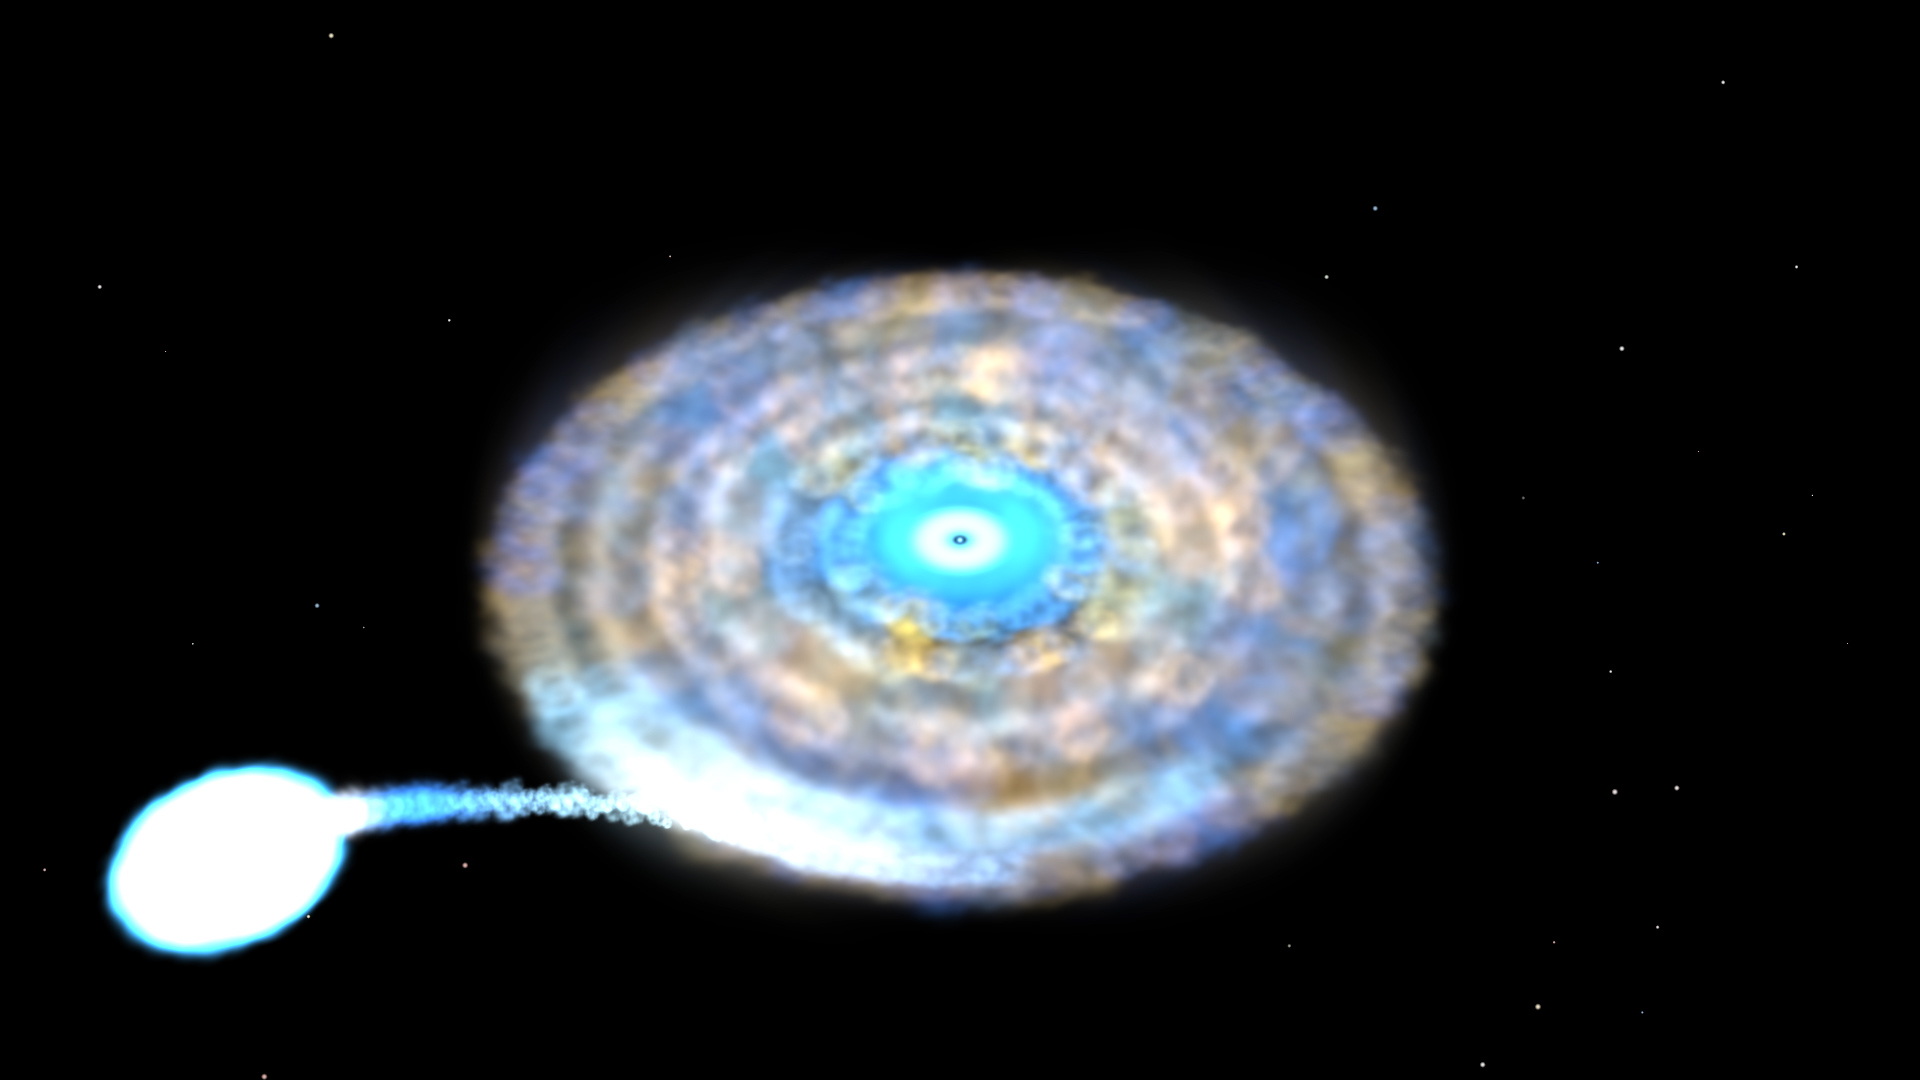 Scientists analyzing the first data from the Neutron Star Interior Composition Explorer (NICER) mission have found two stars that revolve around each other every 38 minutes. One of the stars in the system, called IGR J17062–6143 (J17062 for short), is a rapidly spinning, superdense star called a pulsar. The other is probably a hydrogen-poor white dwarf. The discovery bestows the stellar pair with the record for the shortest-known orbital period for a certain class of pulsar binary system.Music: "Games Show Sphere 2" from Killer TracksComplete transcript available.Watch this video on the NASA Goddard YouTube channel.